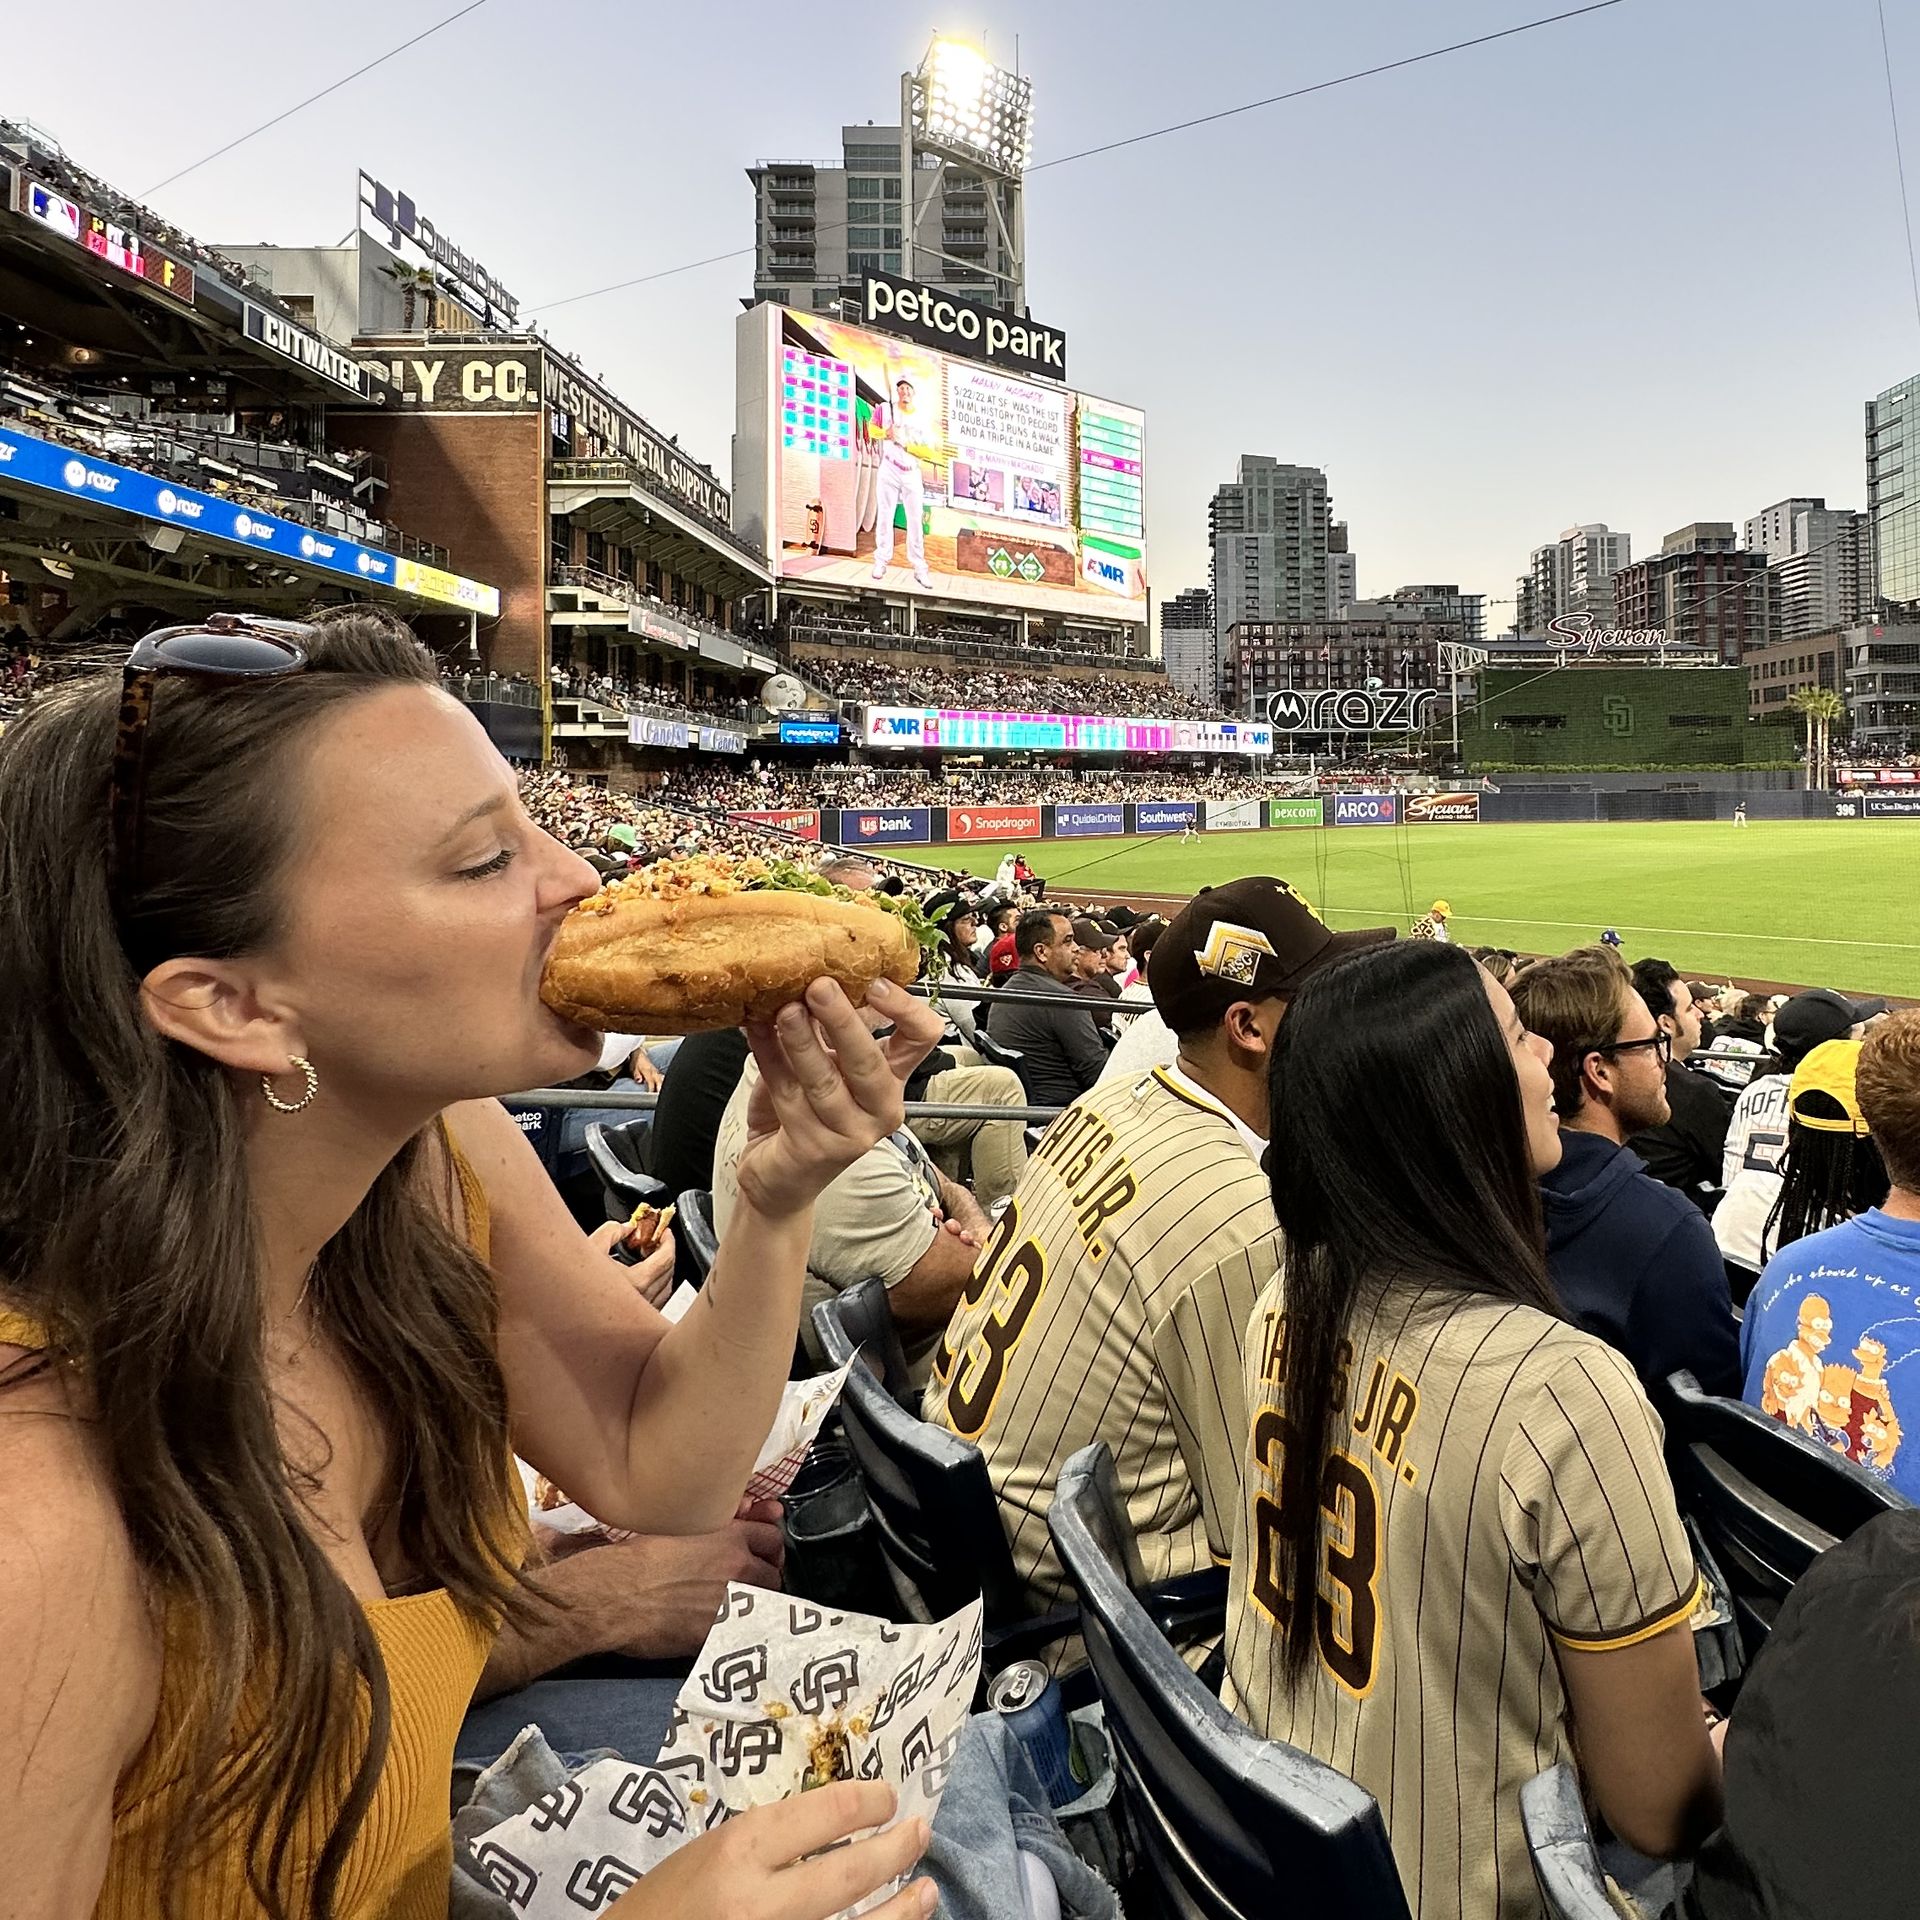 Petco Park: Home of the Padres